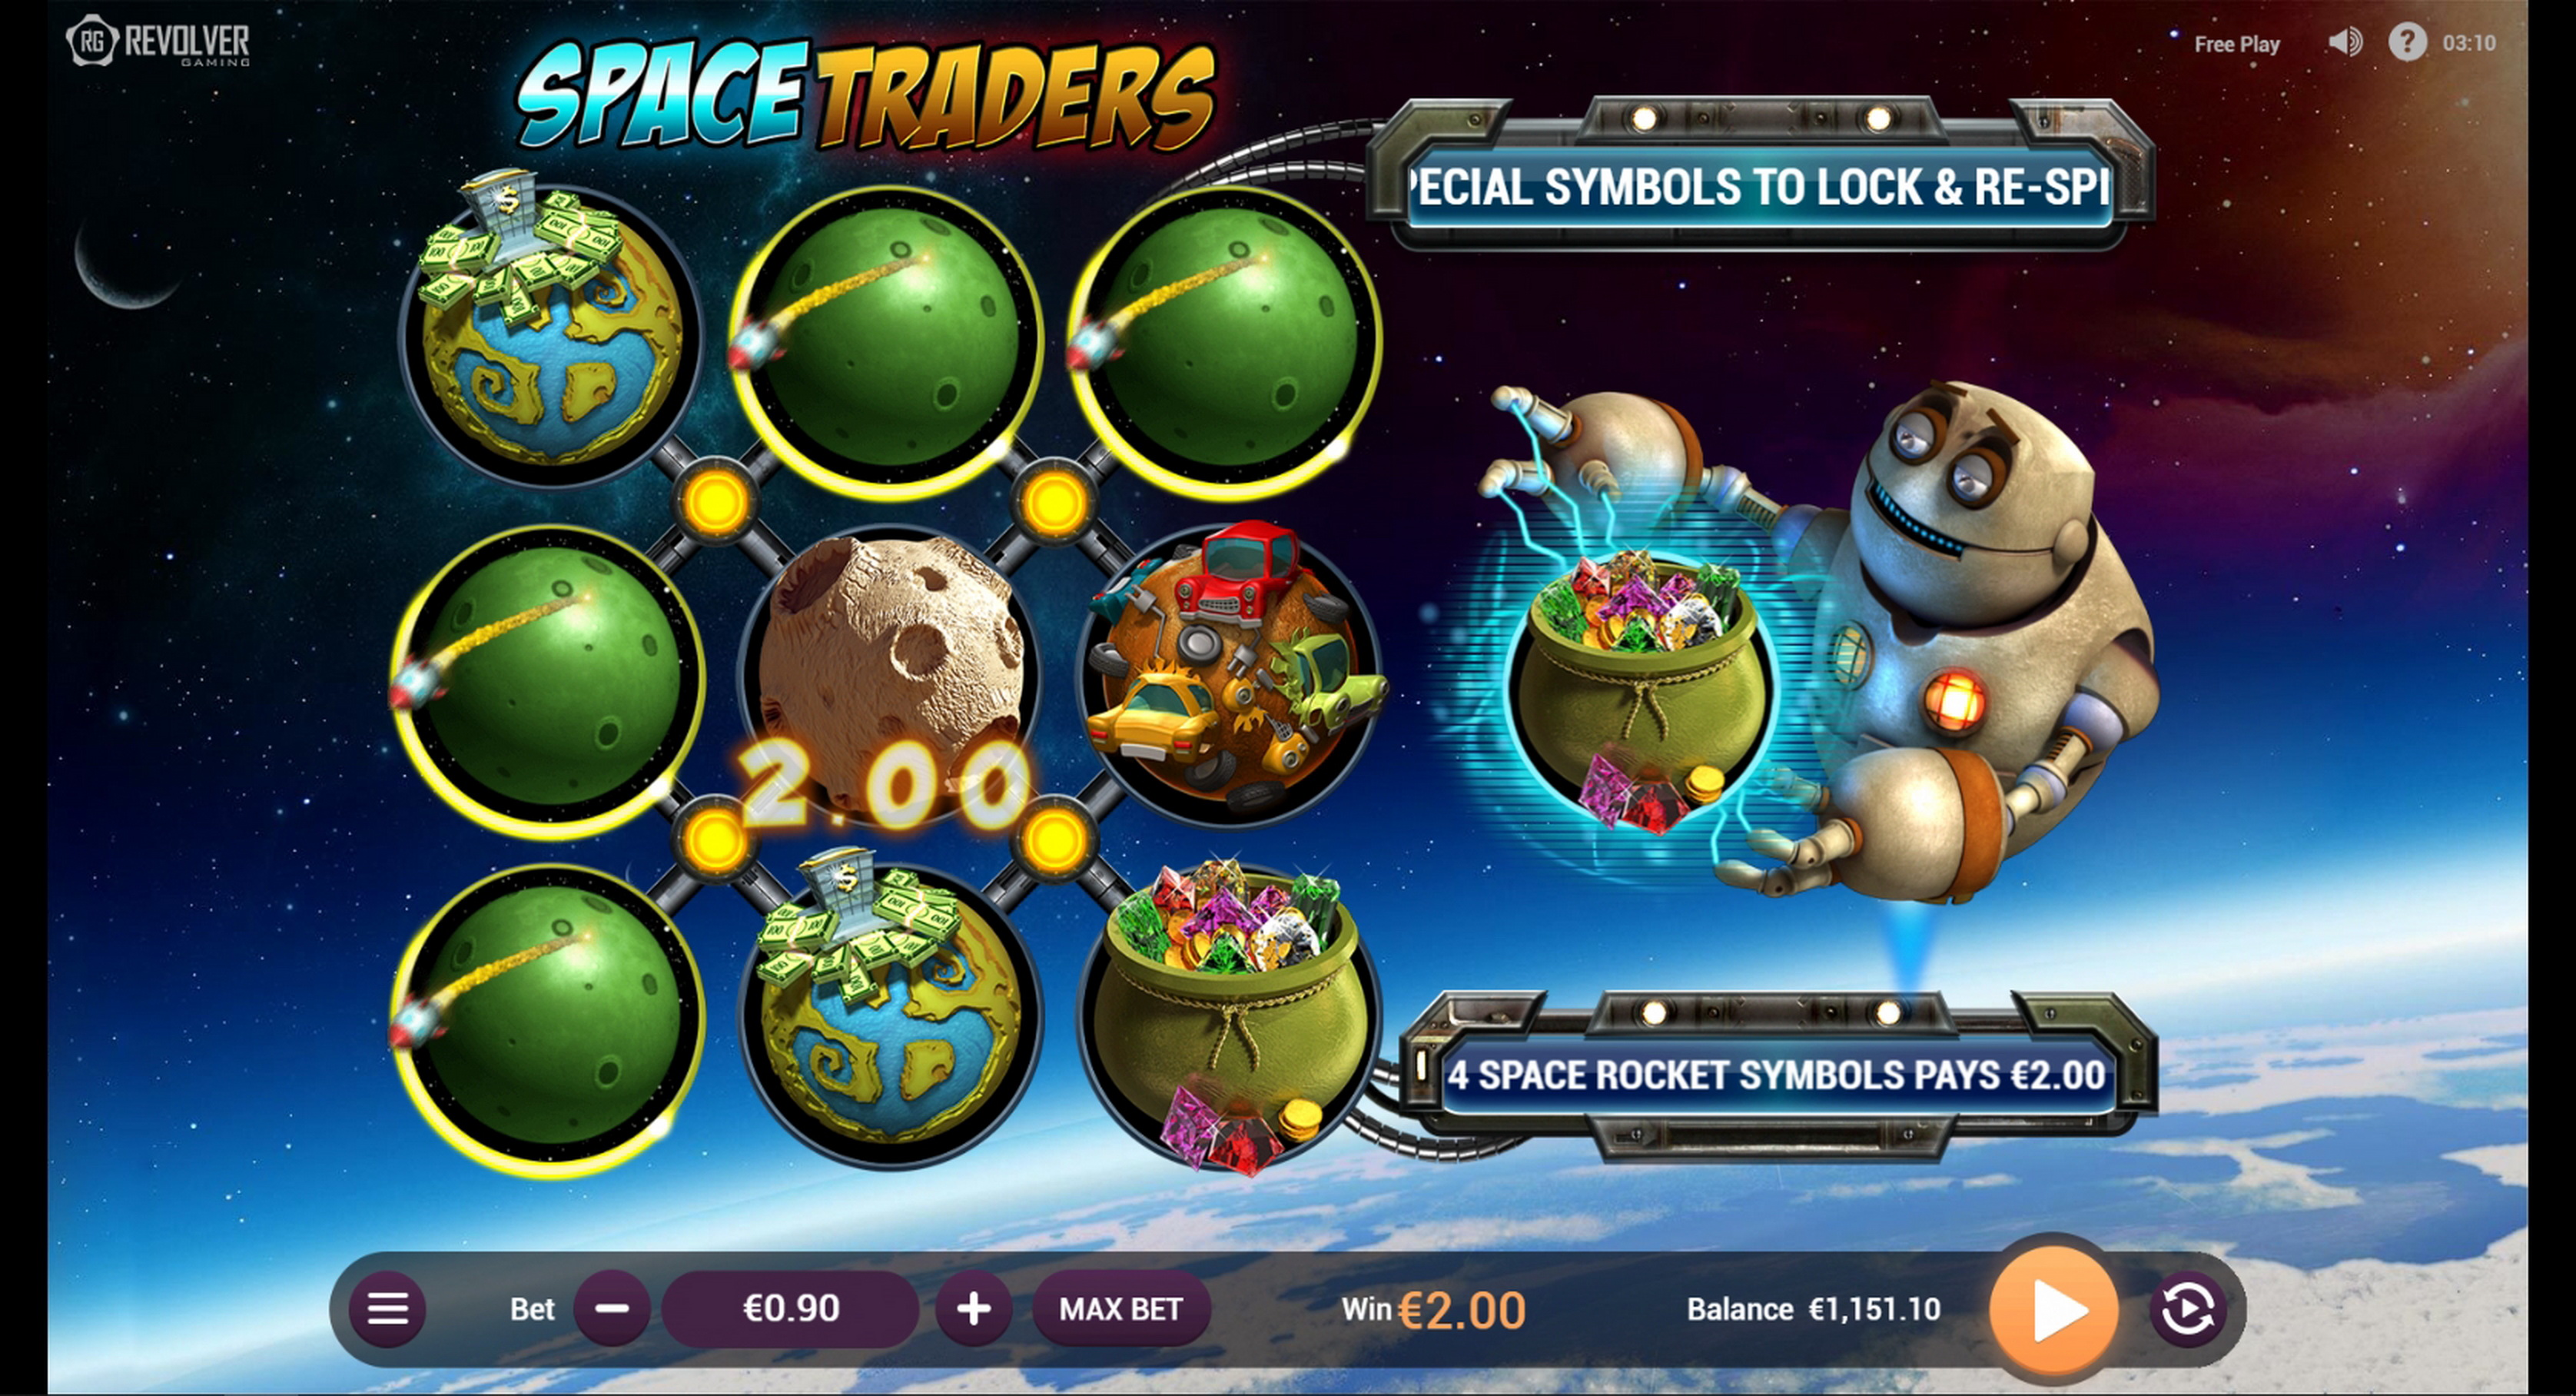 Win Money in Space Traders Free Slot Game by Revolver Gaming